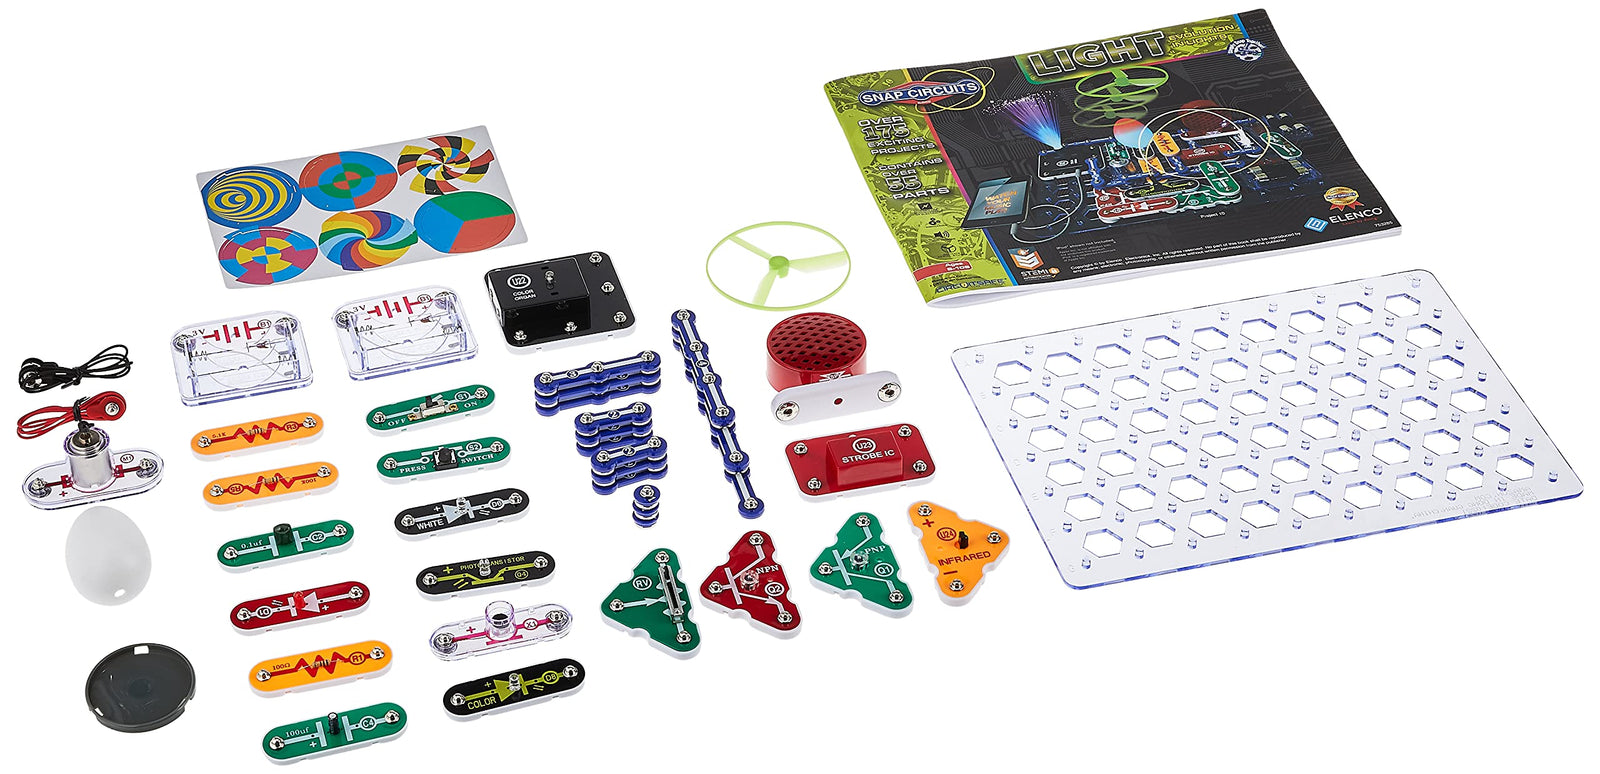 Snap Circuits LIGHT Electronics Exploration Kit | Over 175 Exciting STEM Projects | Full Color Project Manual | 55+ Snap Circuits Parts | STEM Educational Toys for Kids 8+,Multi